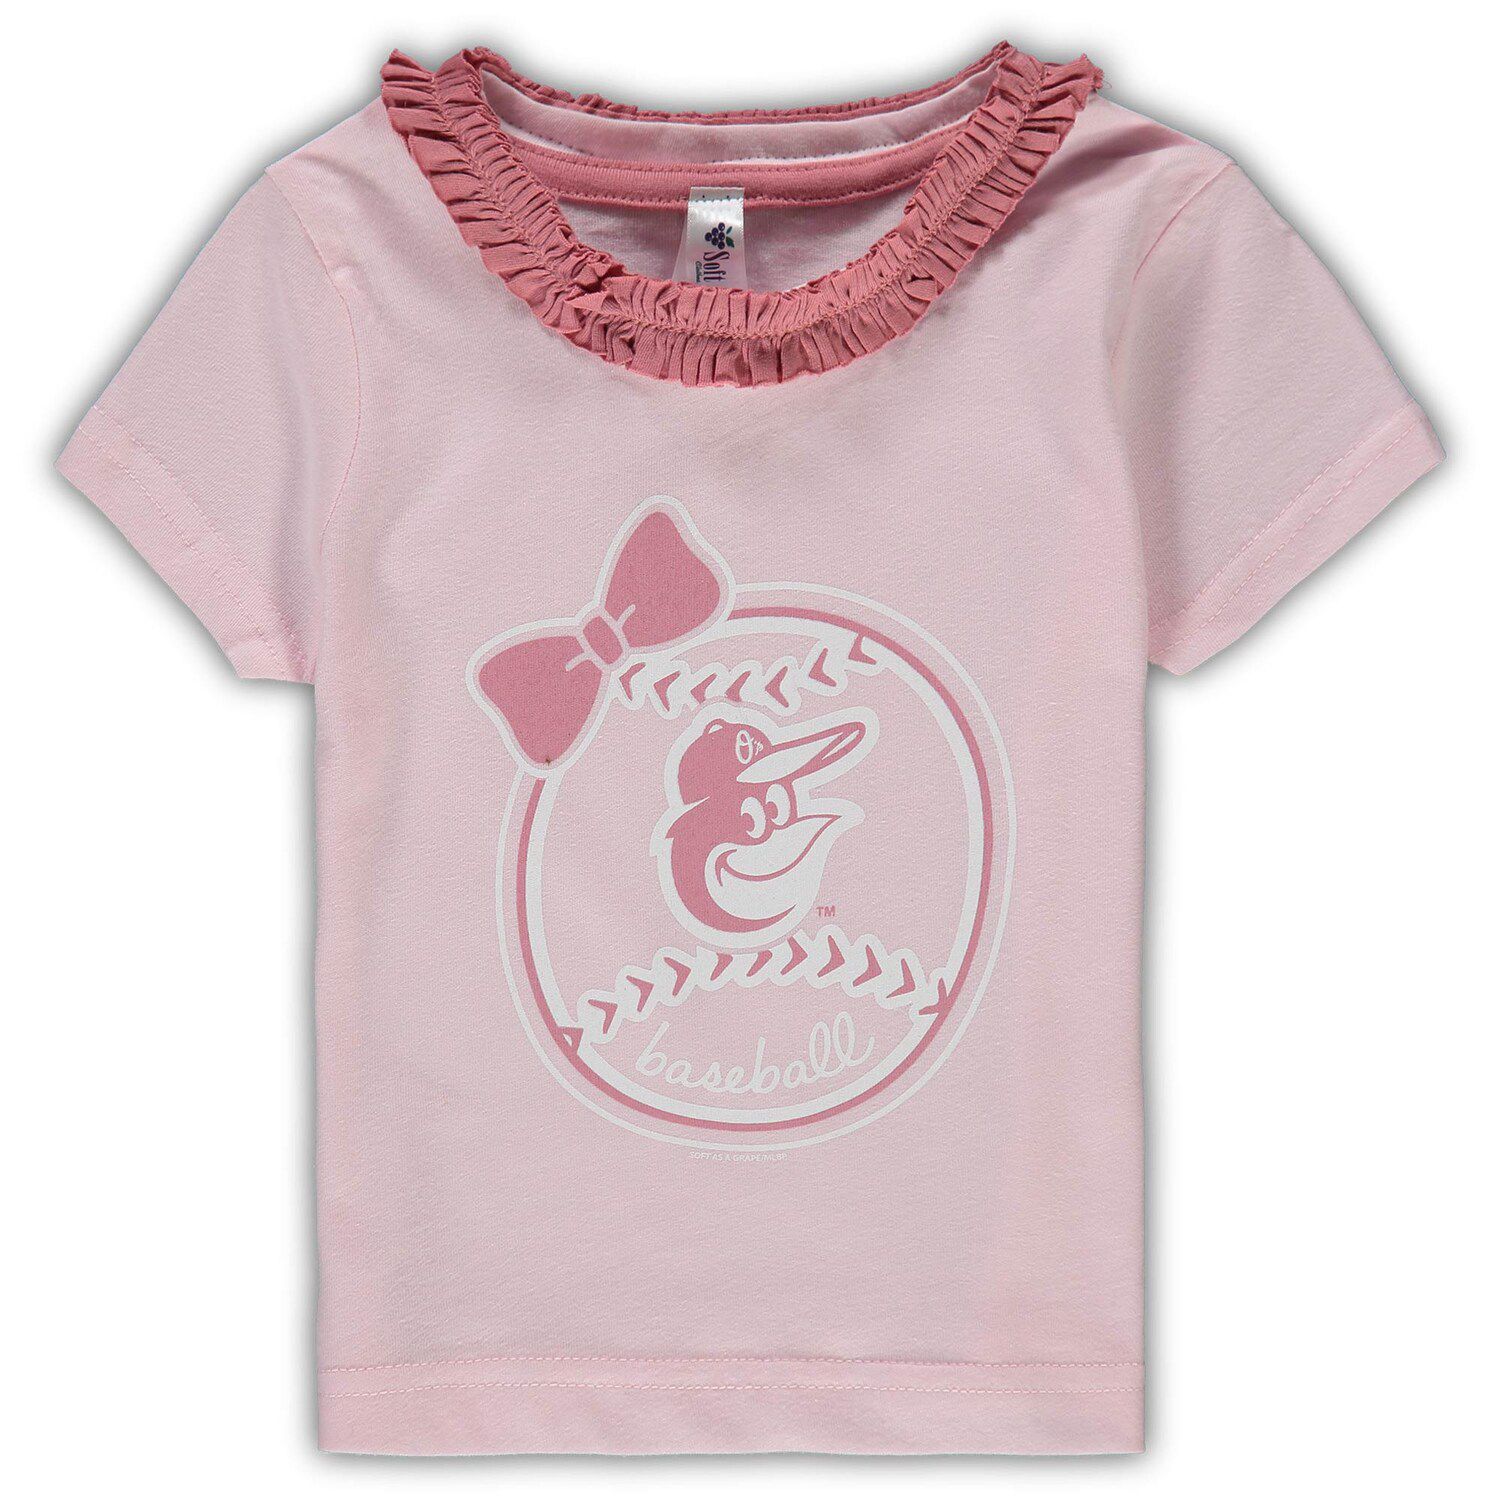 Image for Unbranded Girls Toddler Soft as a Grape Pink Baltimore Orioles Ruffle Collar T-Shirt at Kohl's.